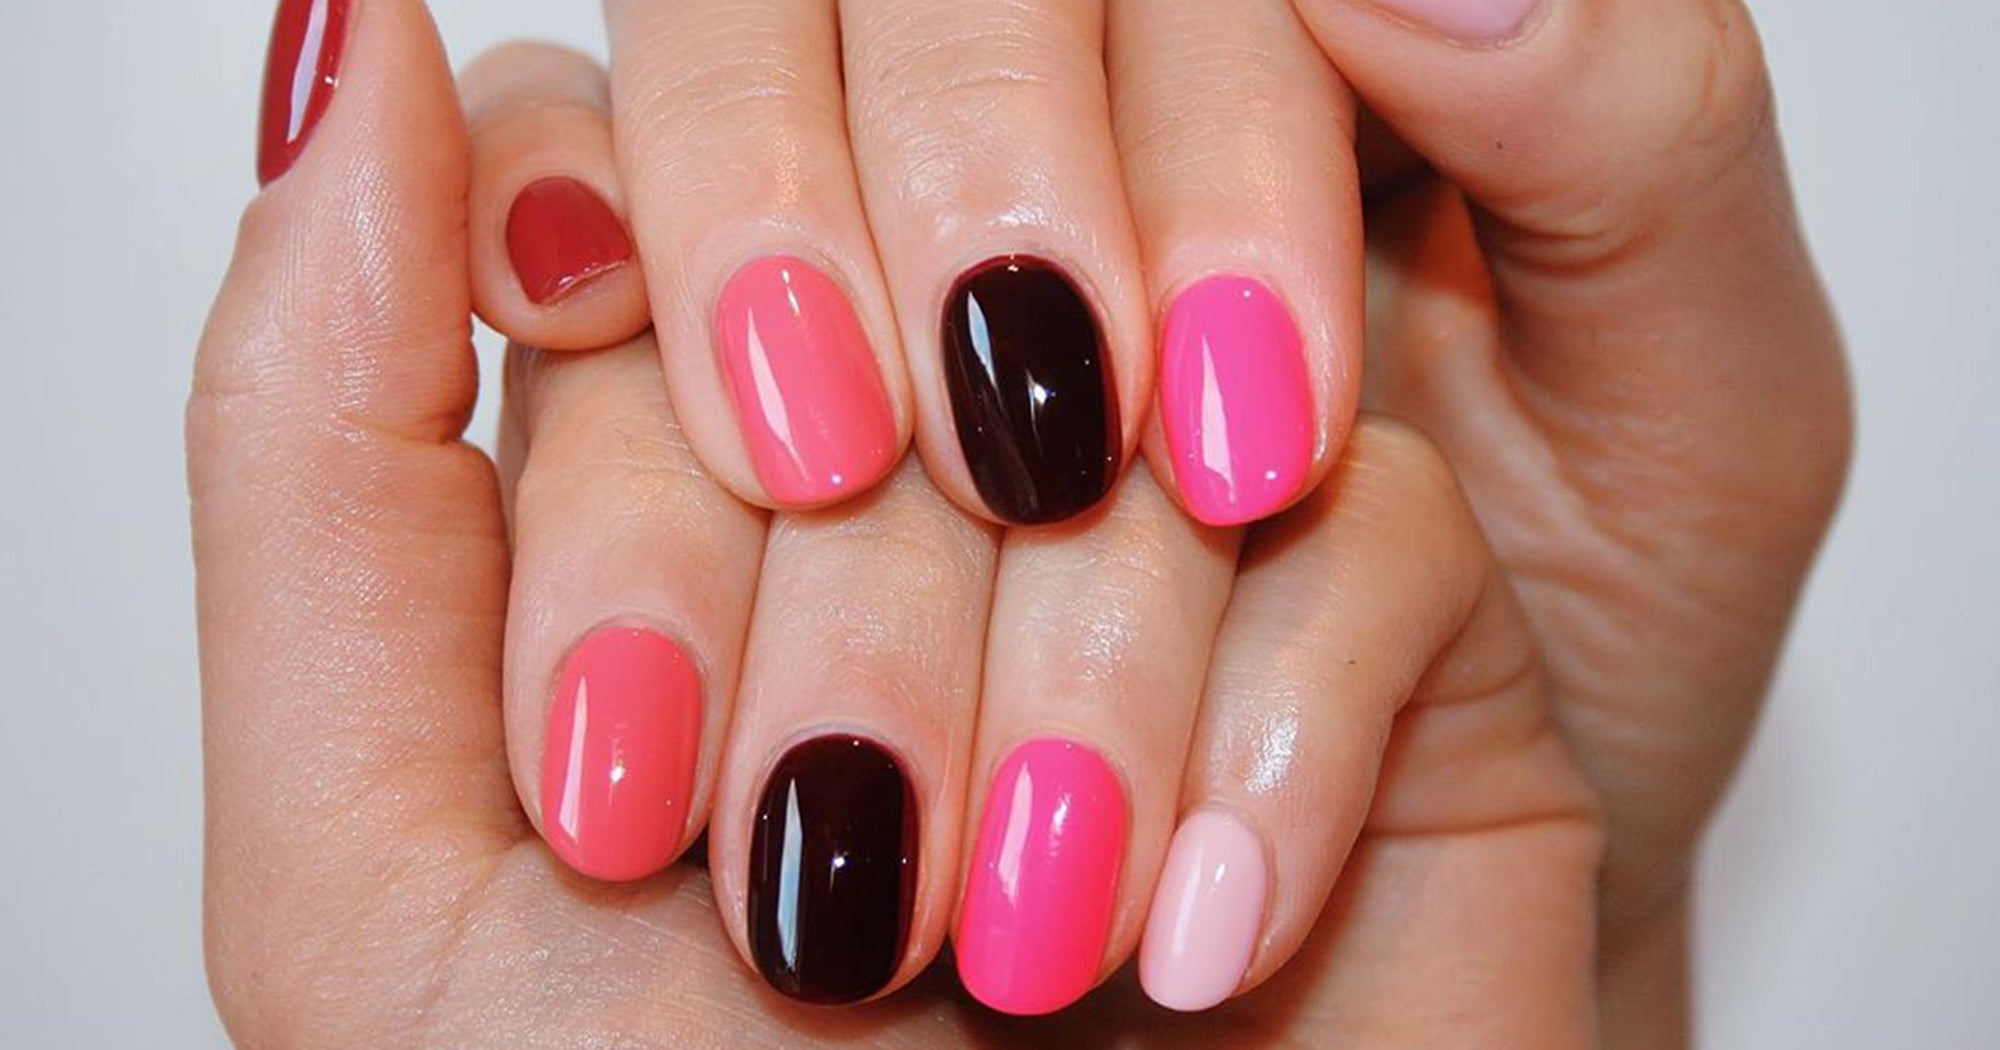 1. Easy Nail Art Techniques to Do at Home - wide 1